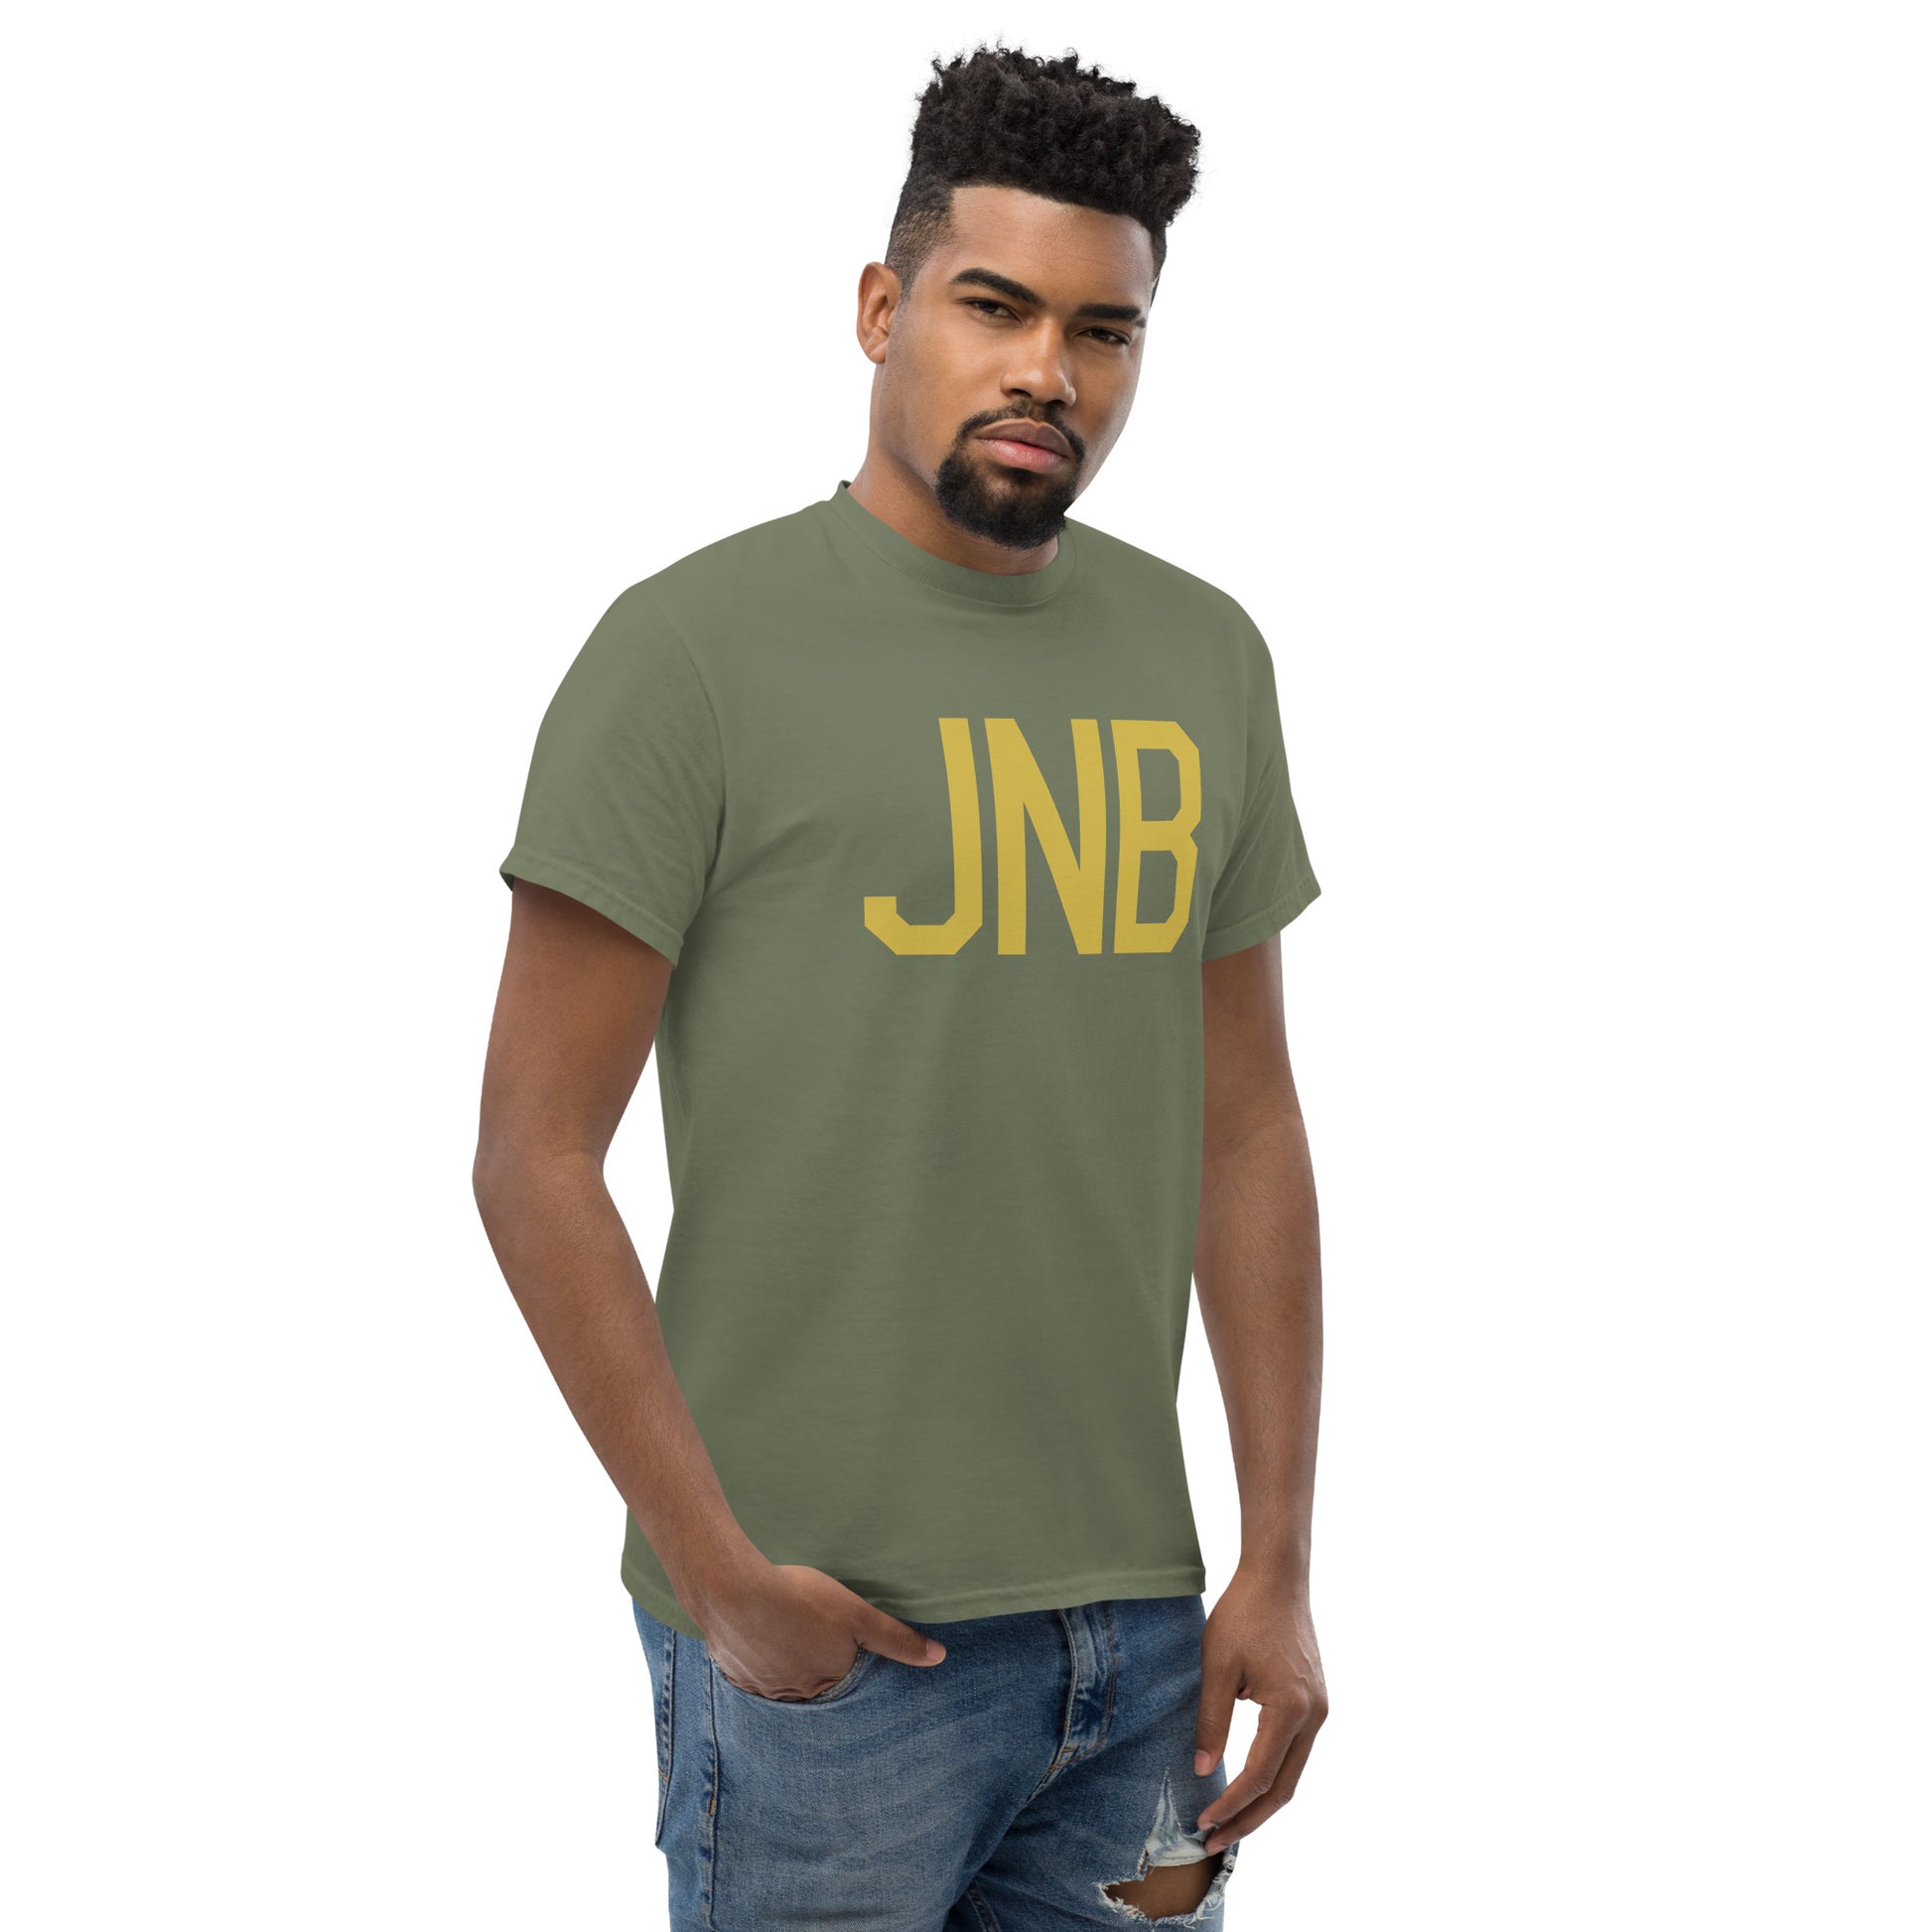 Aviation Enthusiast Men's Tee - Old Gold Graphic • JNB Johannesburg • YHM Designs - Image 08